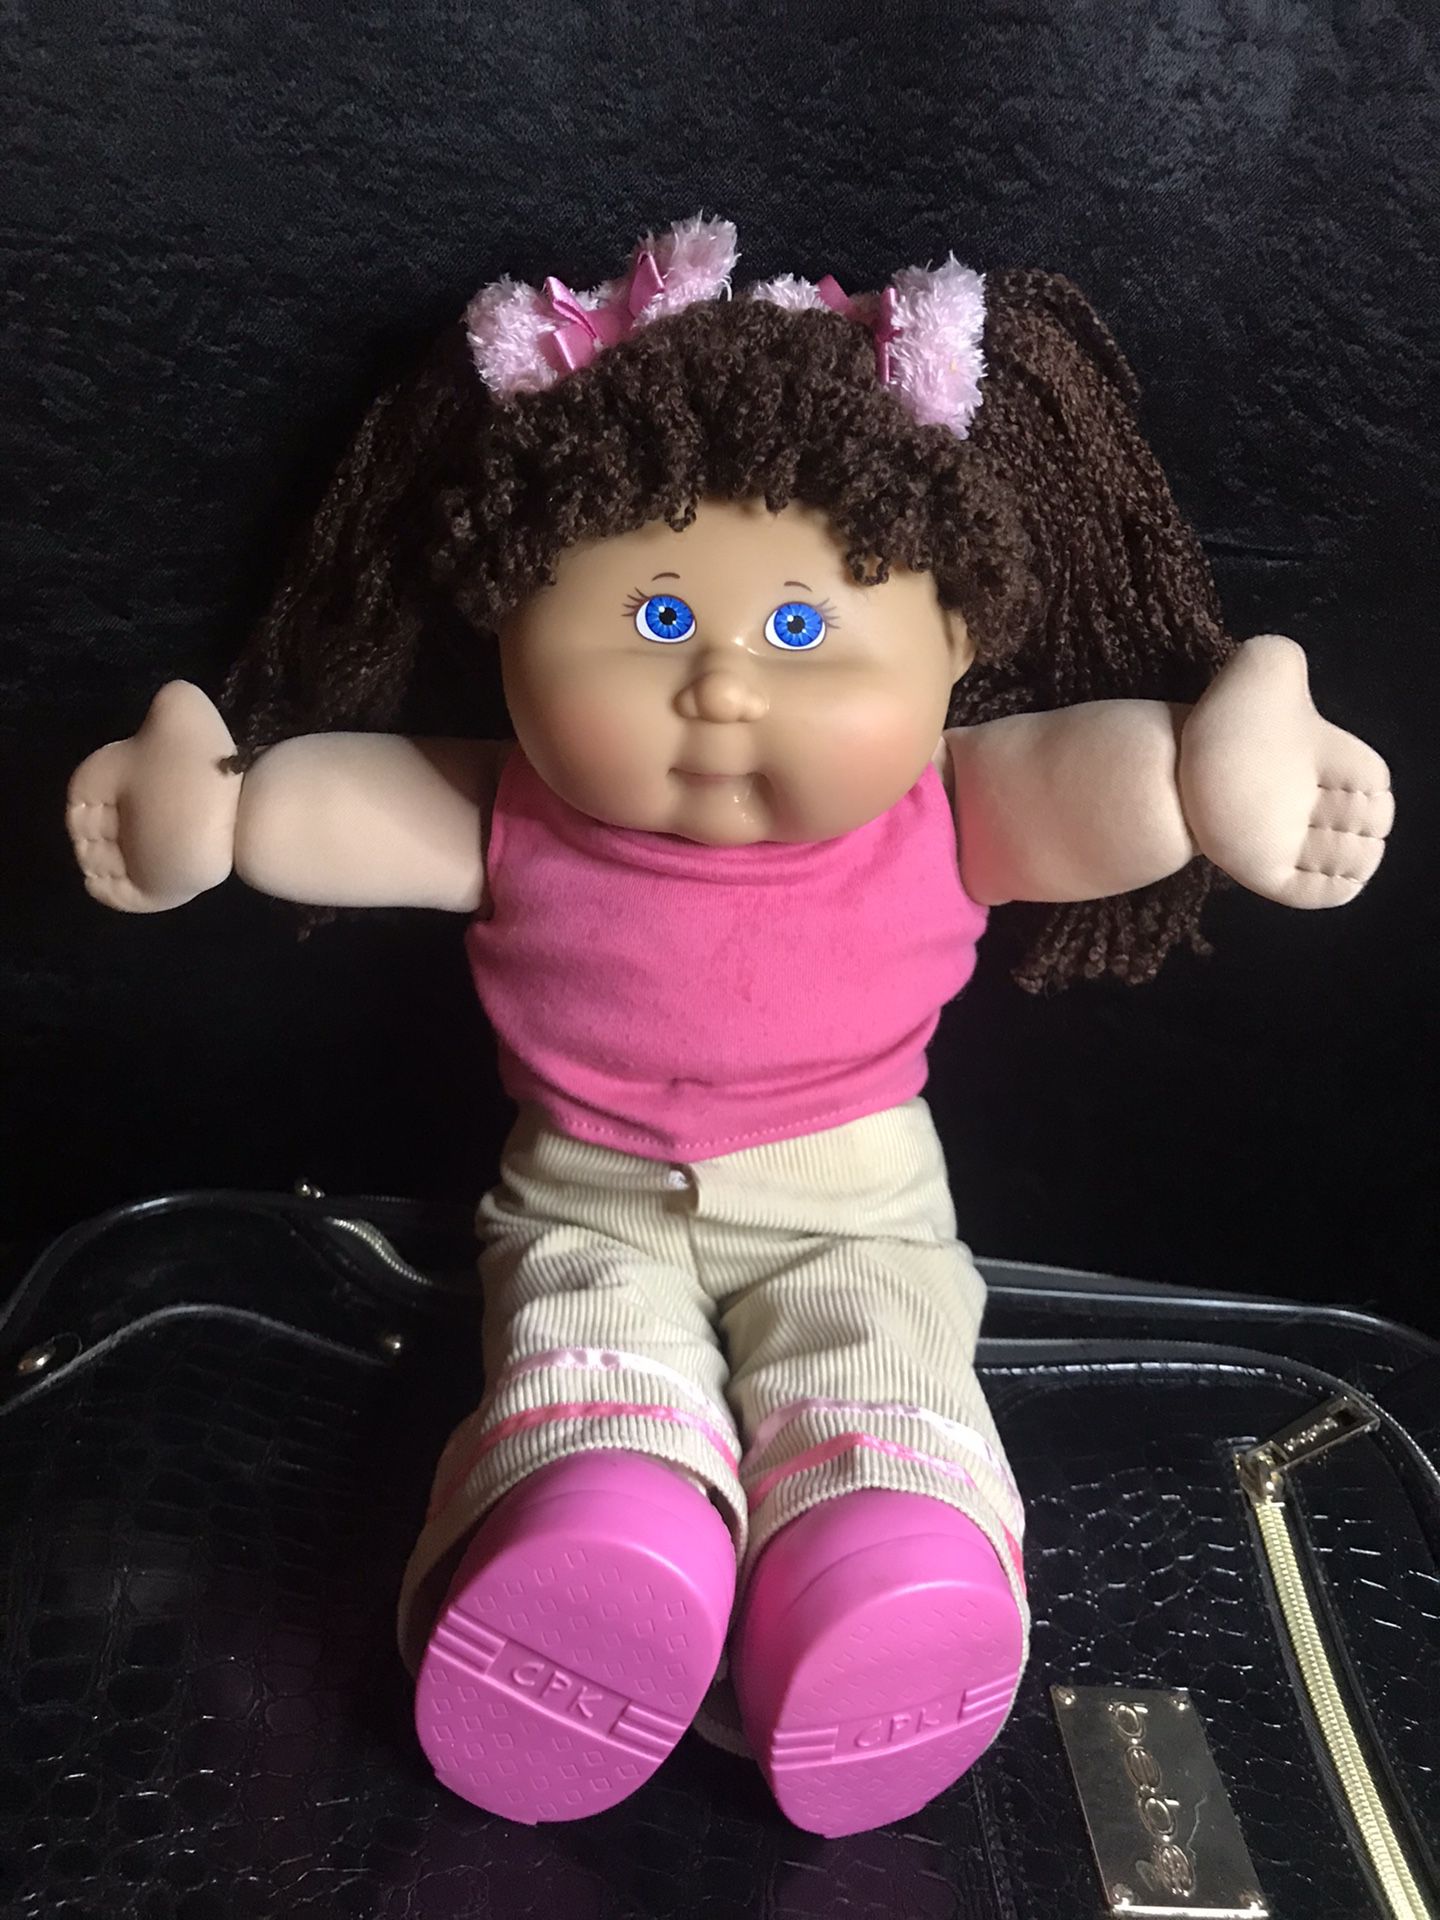 Cabbage patch kid doll! Blue eyes!